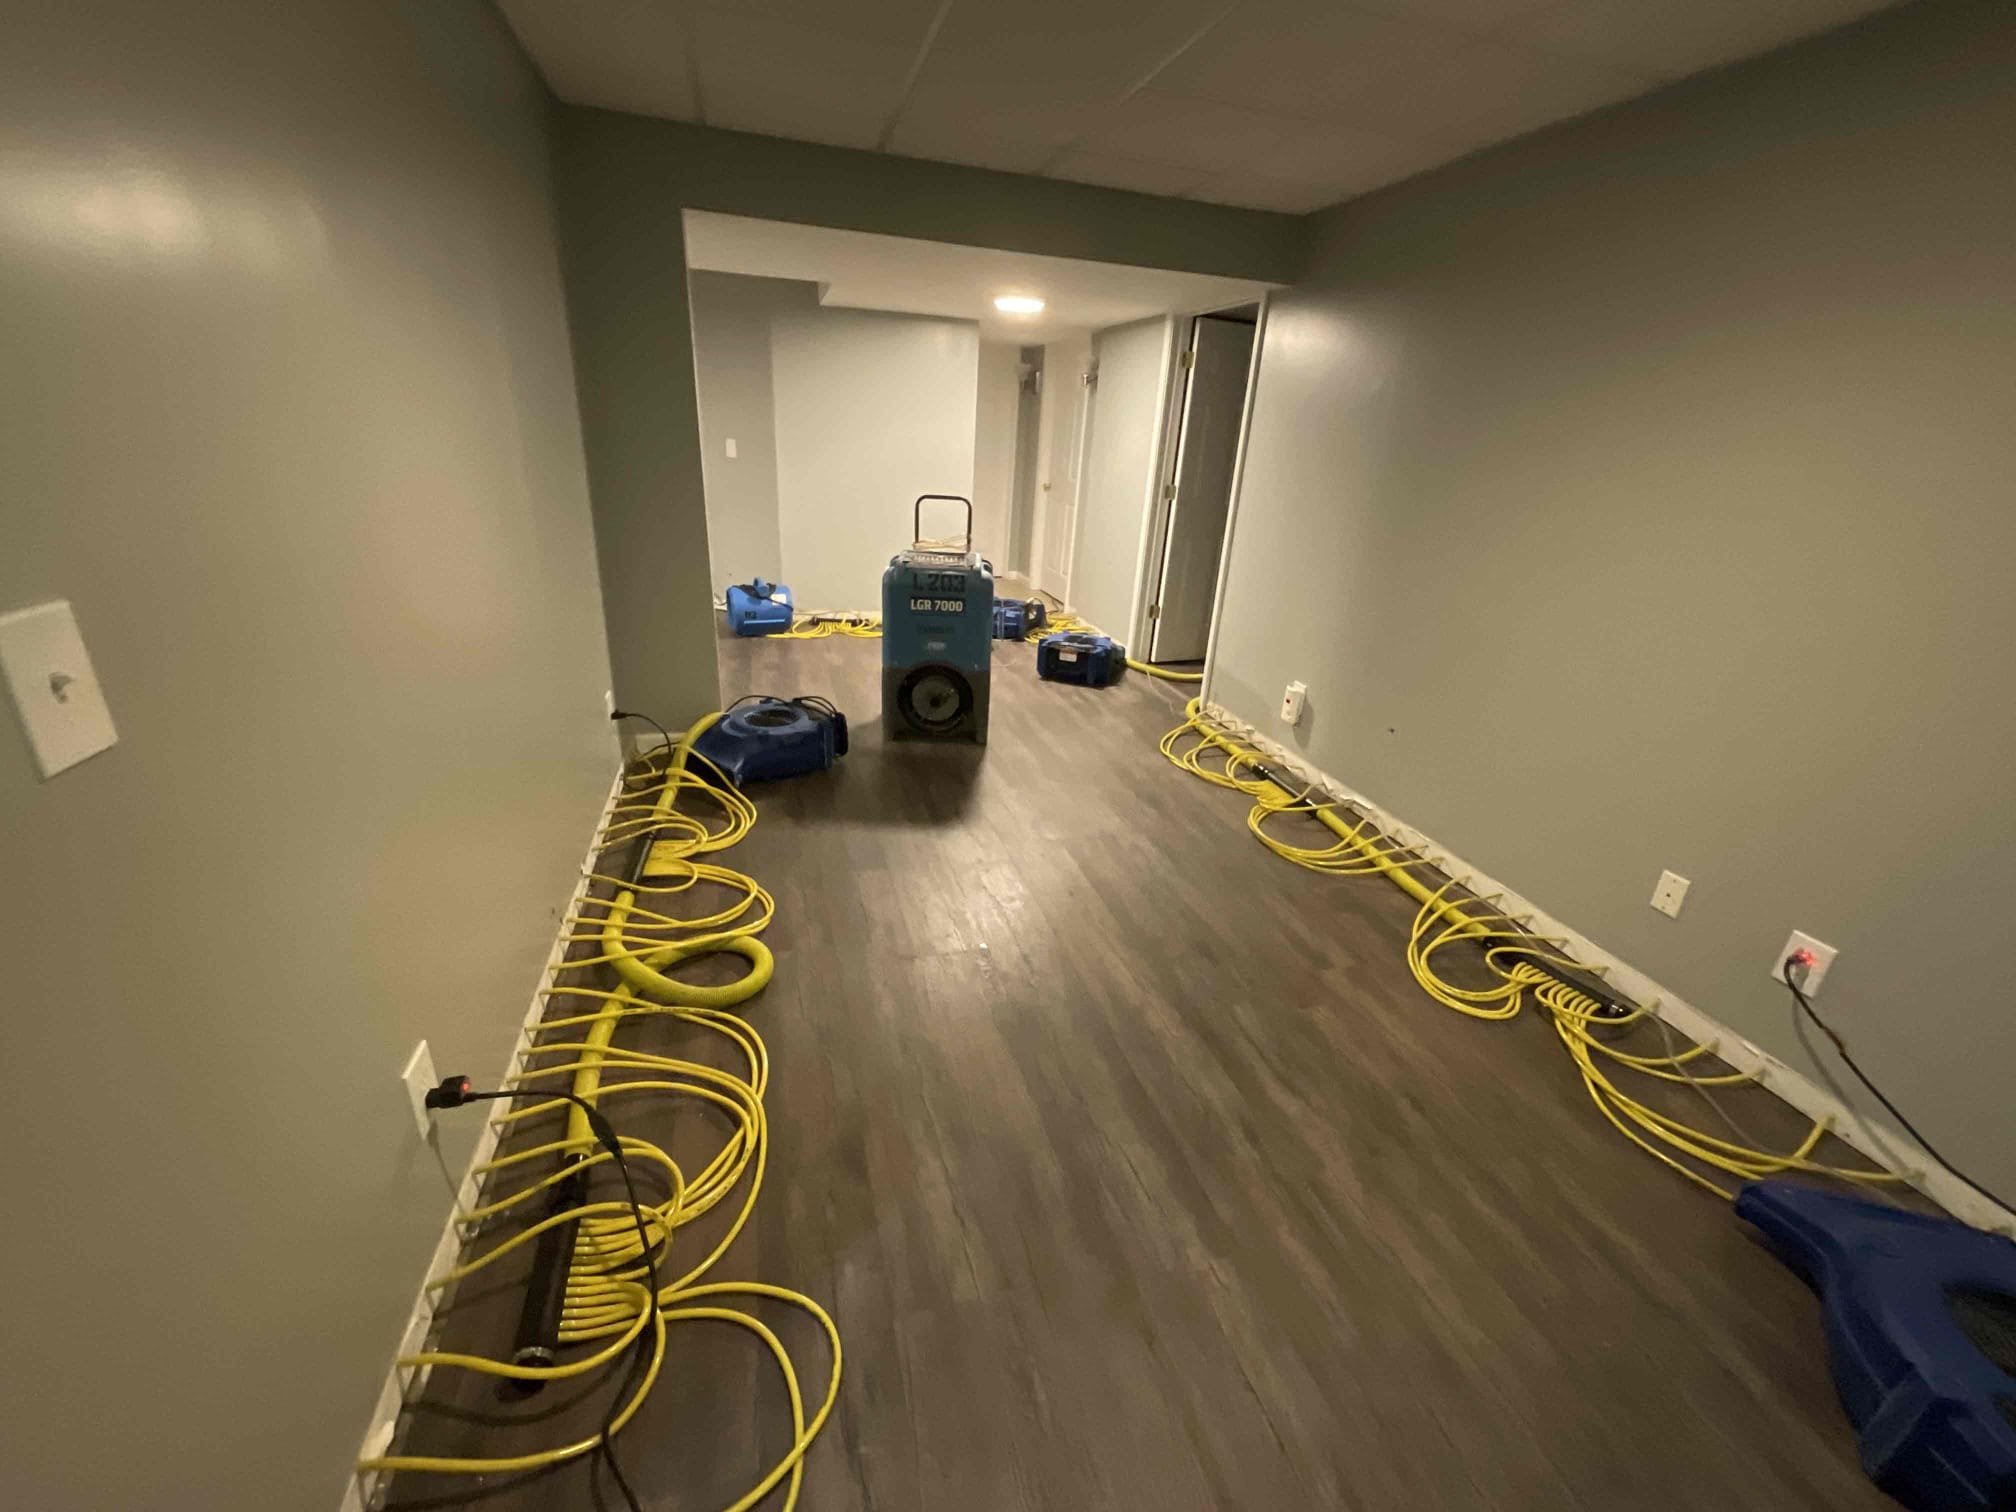 Drying the basement after homeowners experienced a pipe break 